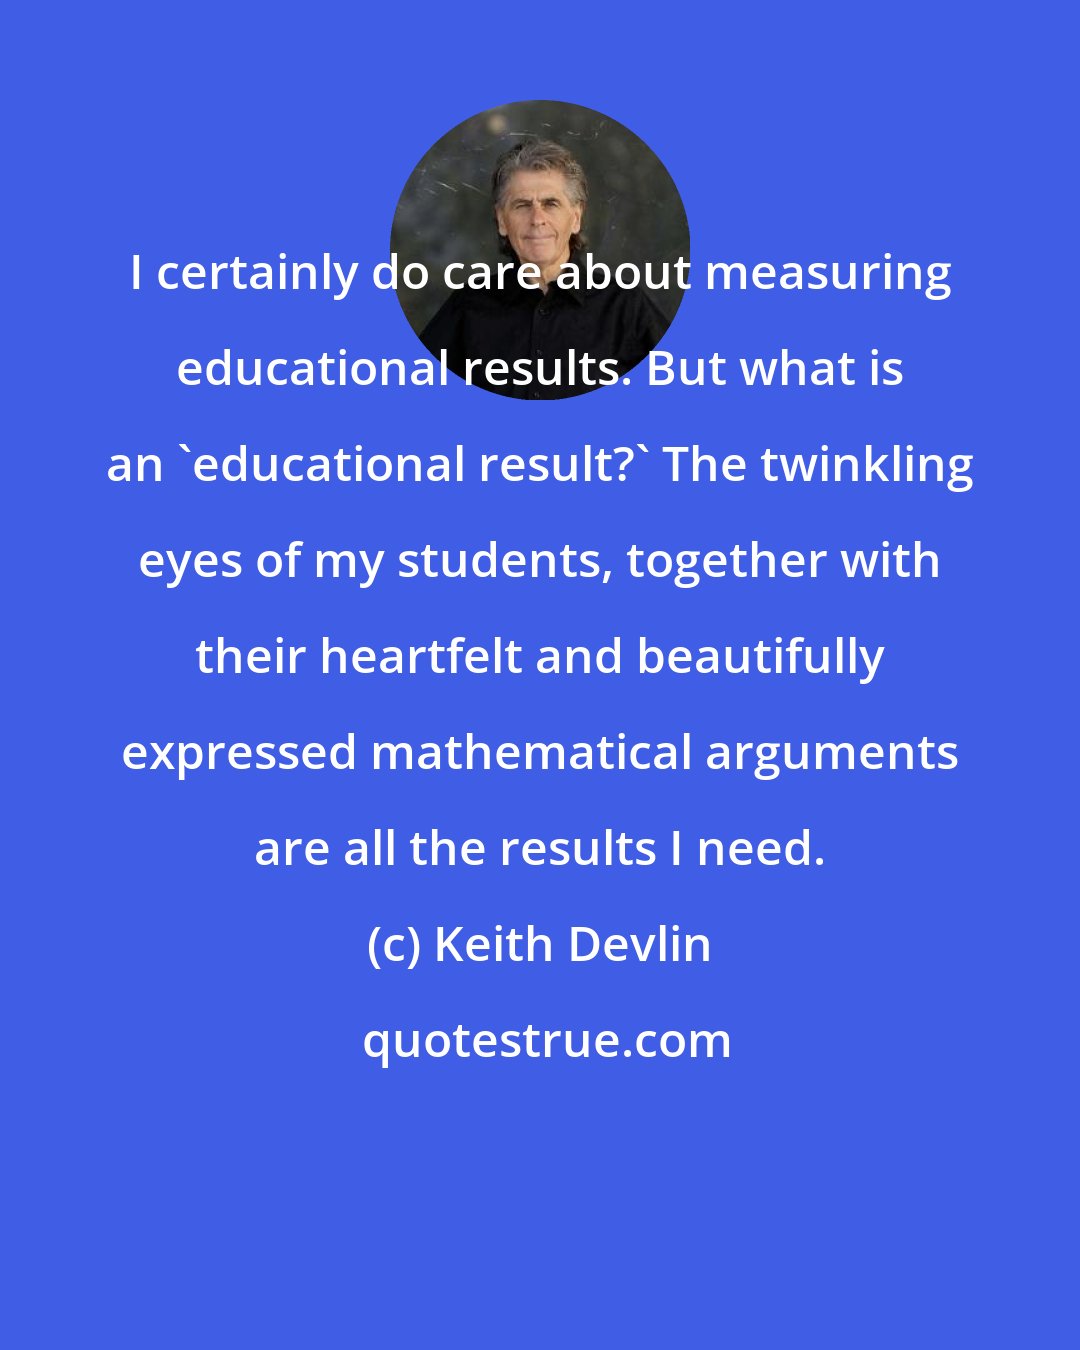 Keith Devlin: I certainly do care about measuring educational results. But what is an 'educational result?' The twinkling eyes of my students, together with their heartfelt and beautifully expressed mathematical arguments are all the results I need.